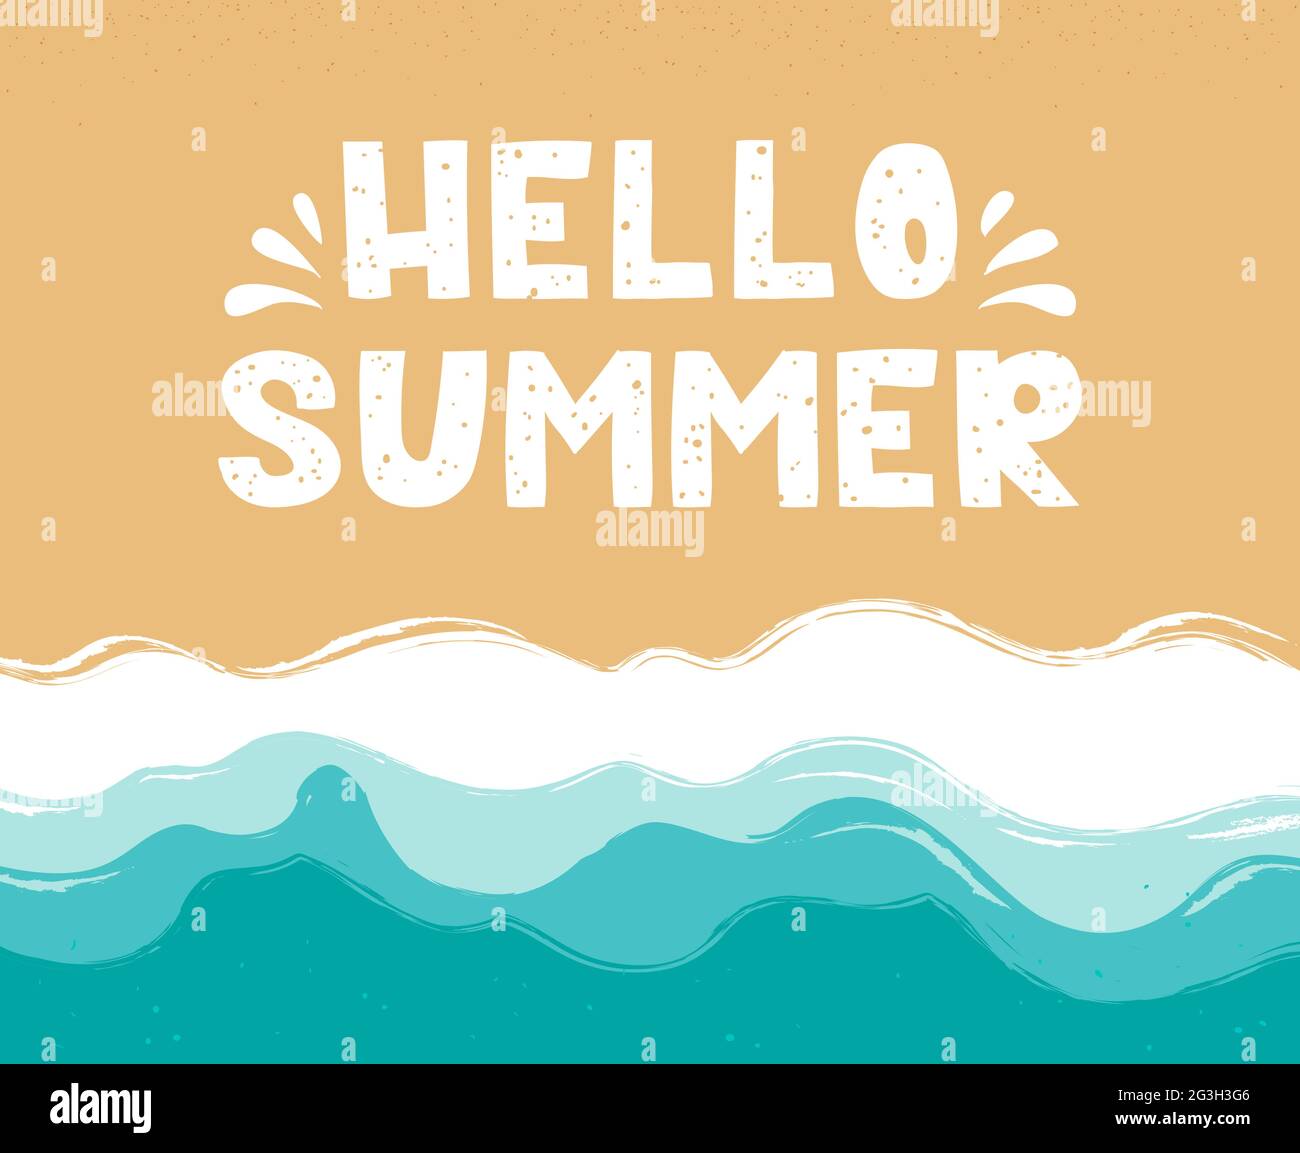 Hello Summer - lettering in the sand. Beach, sand, seashore with blue azure waves. Sea coast top view, aerial view. Ocean, marine background. Hand drawn vector illustration. Stock Vector